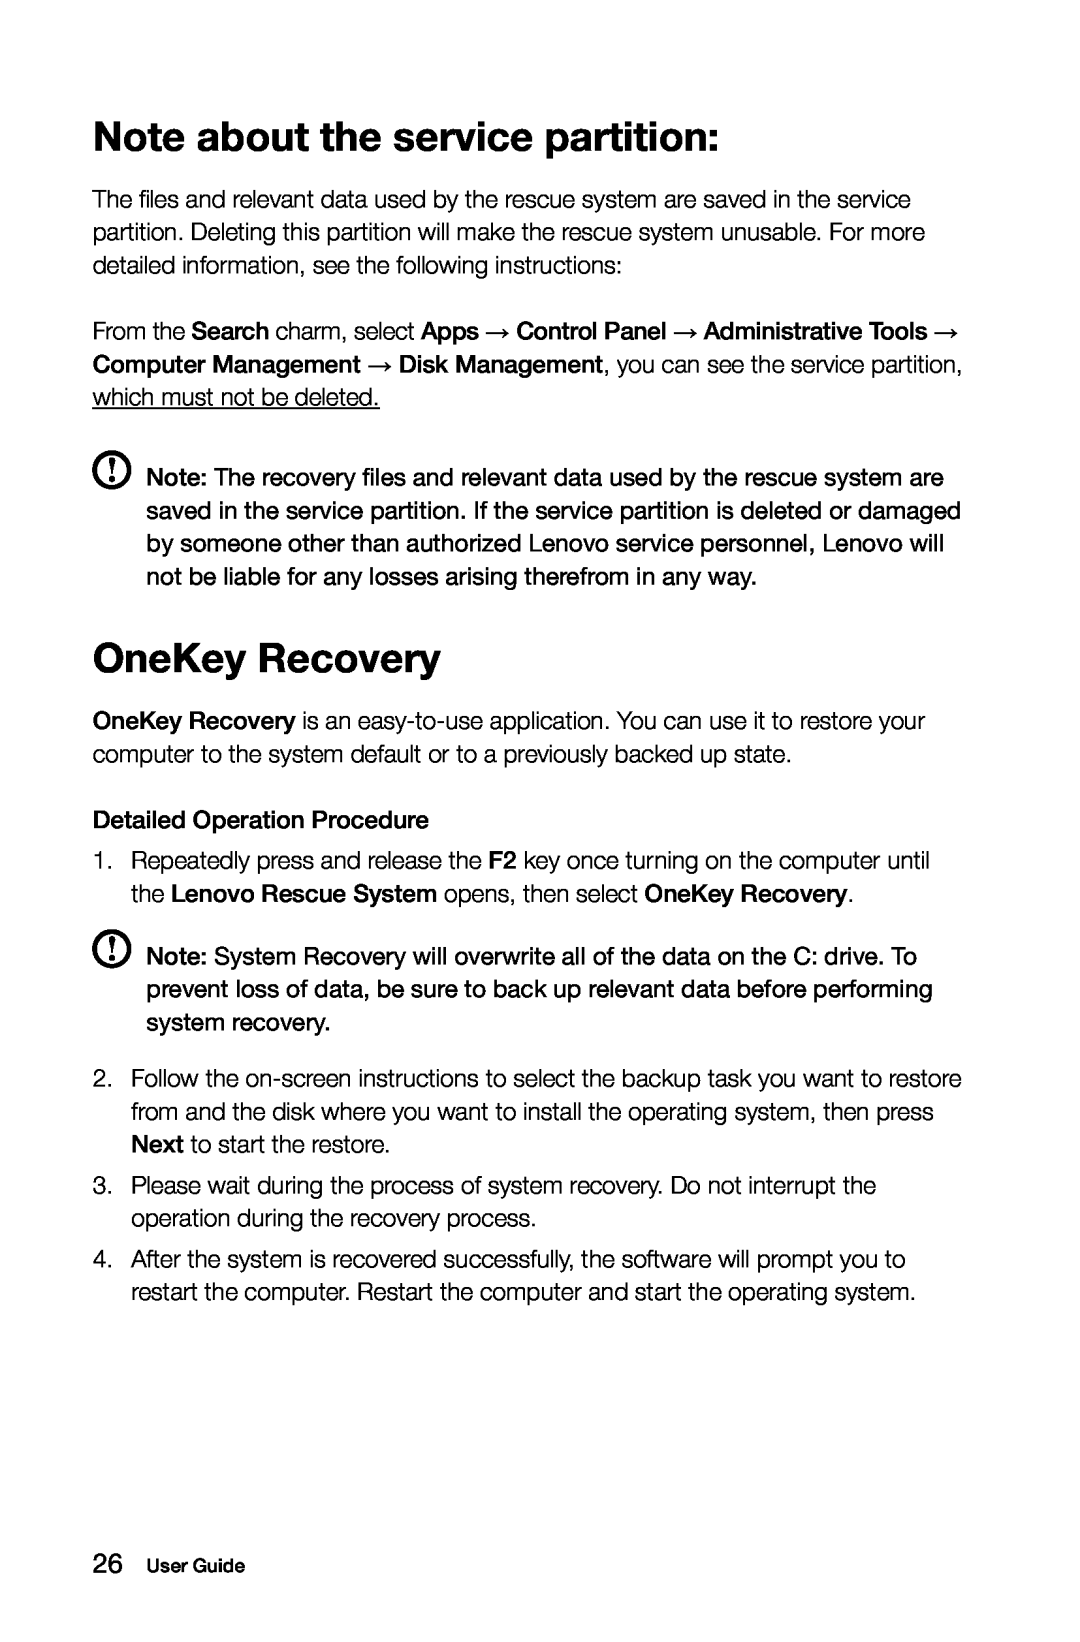 Lenovo 10120/90A0 [K450 NON-ES], 10121/90A1 [K450 ES] manual Note about the service partition, OneKey Recovery 